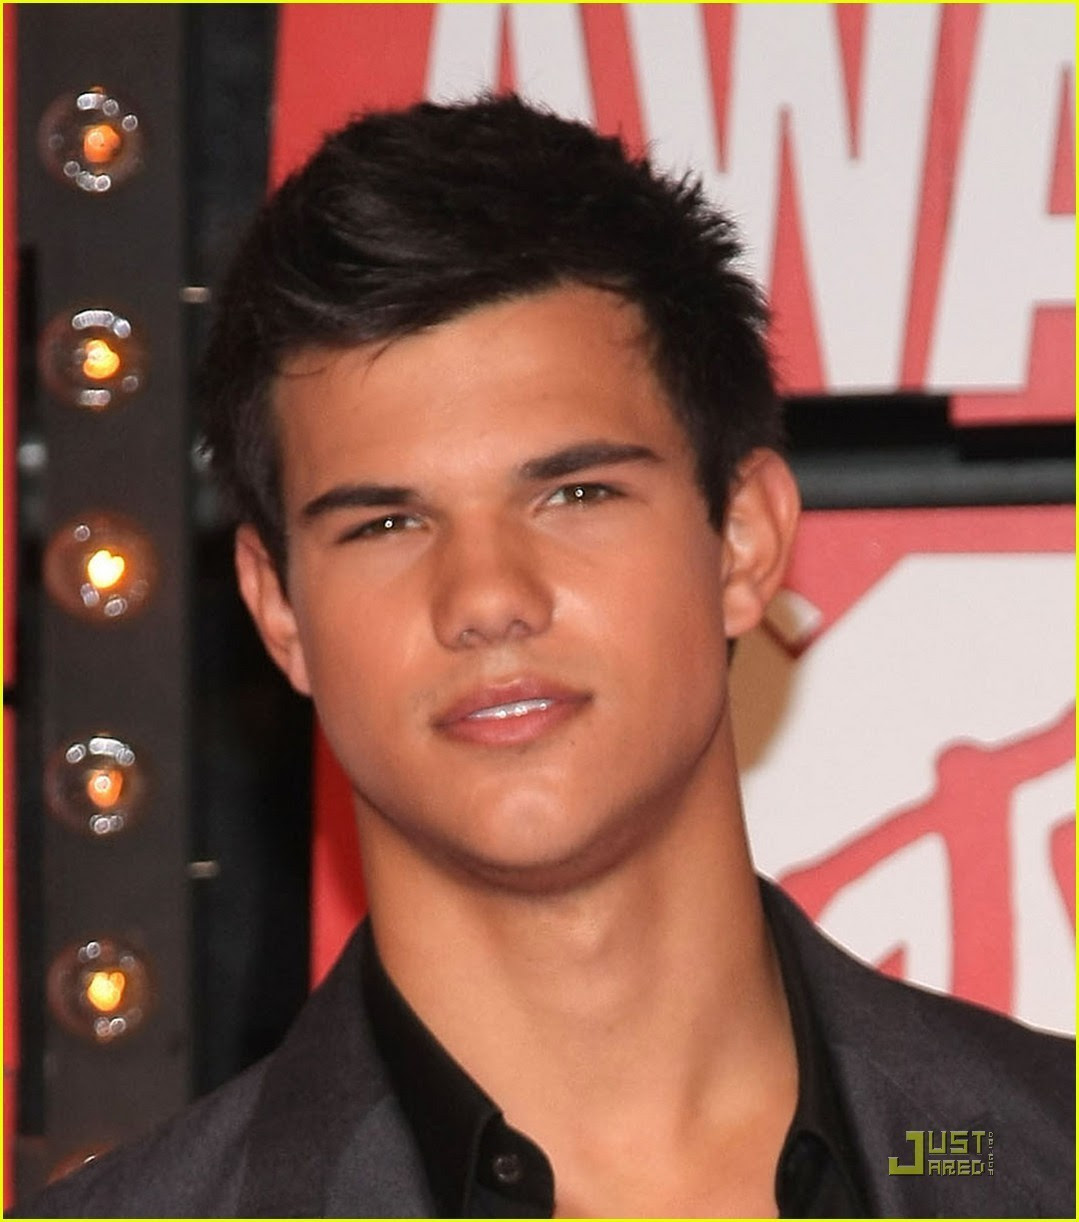 Taylor Lautner In Bulk For Twilight Gallery From The